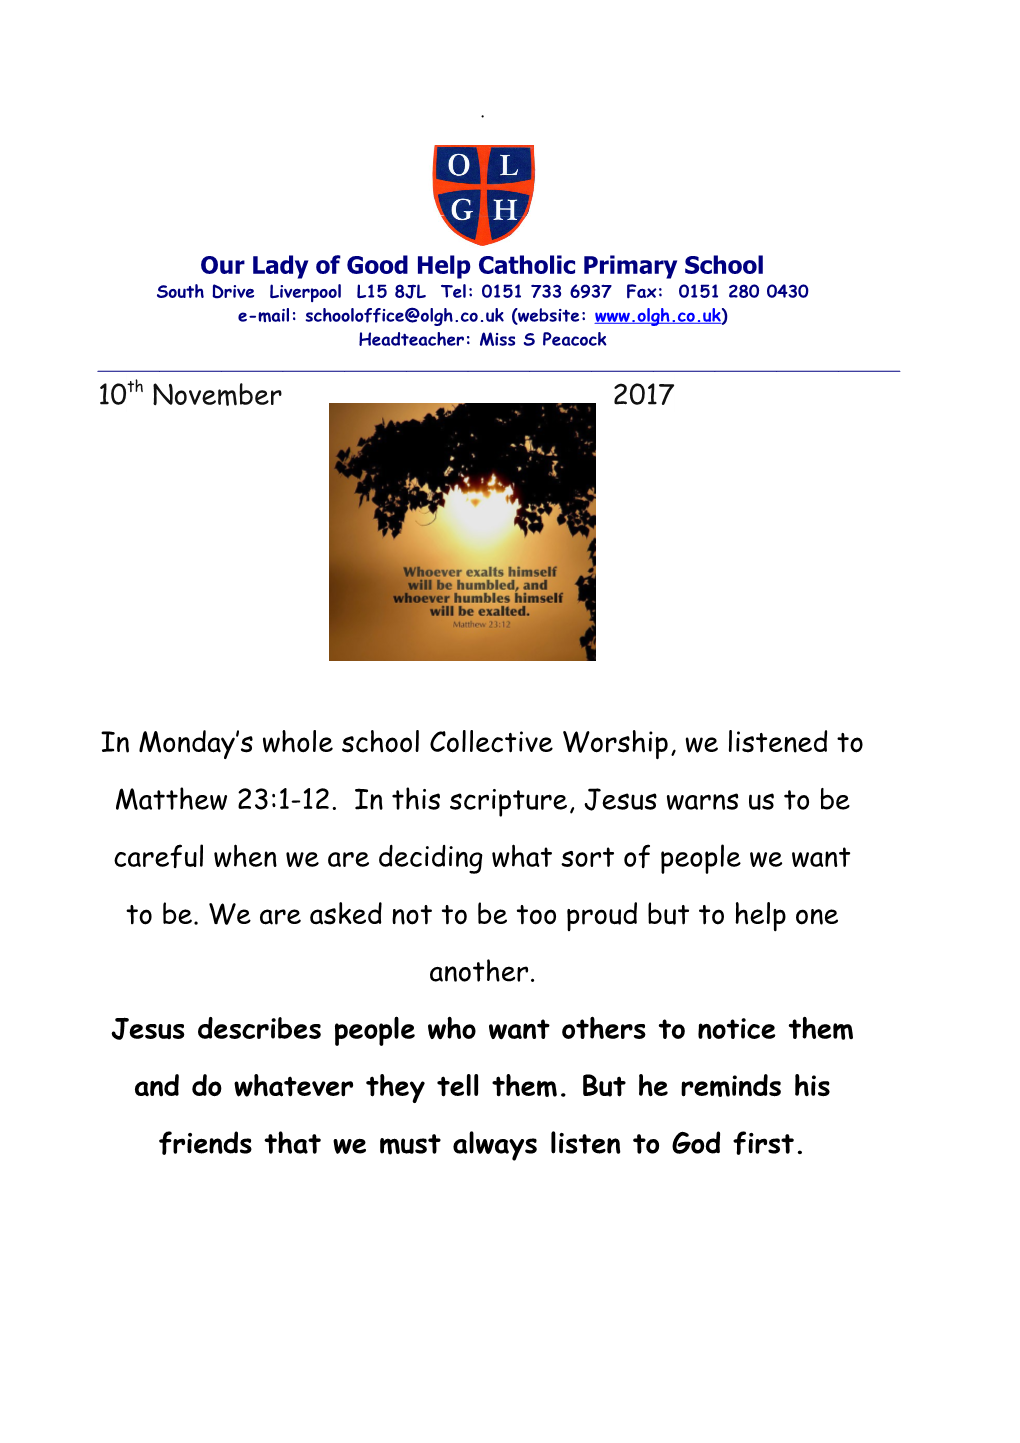 Our Lady of Good Help Catholic Primary School